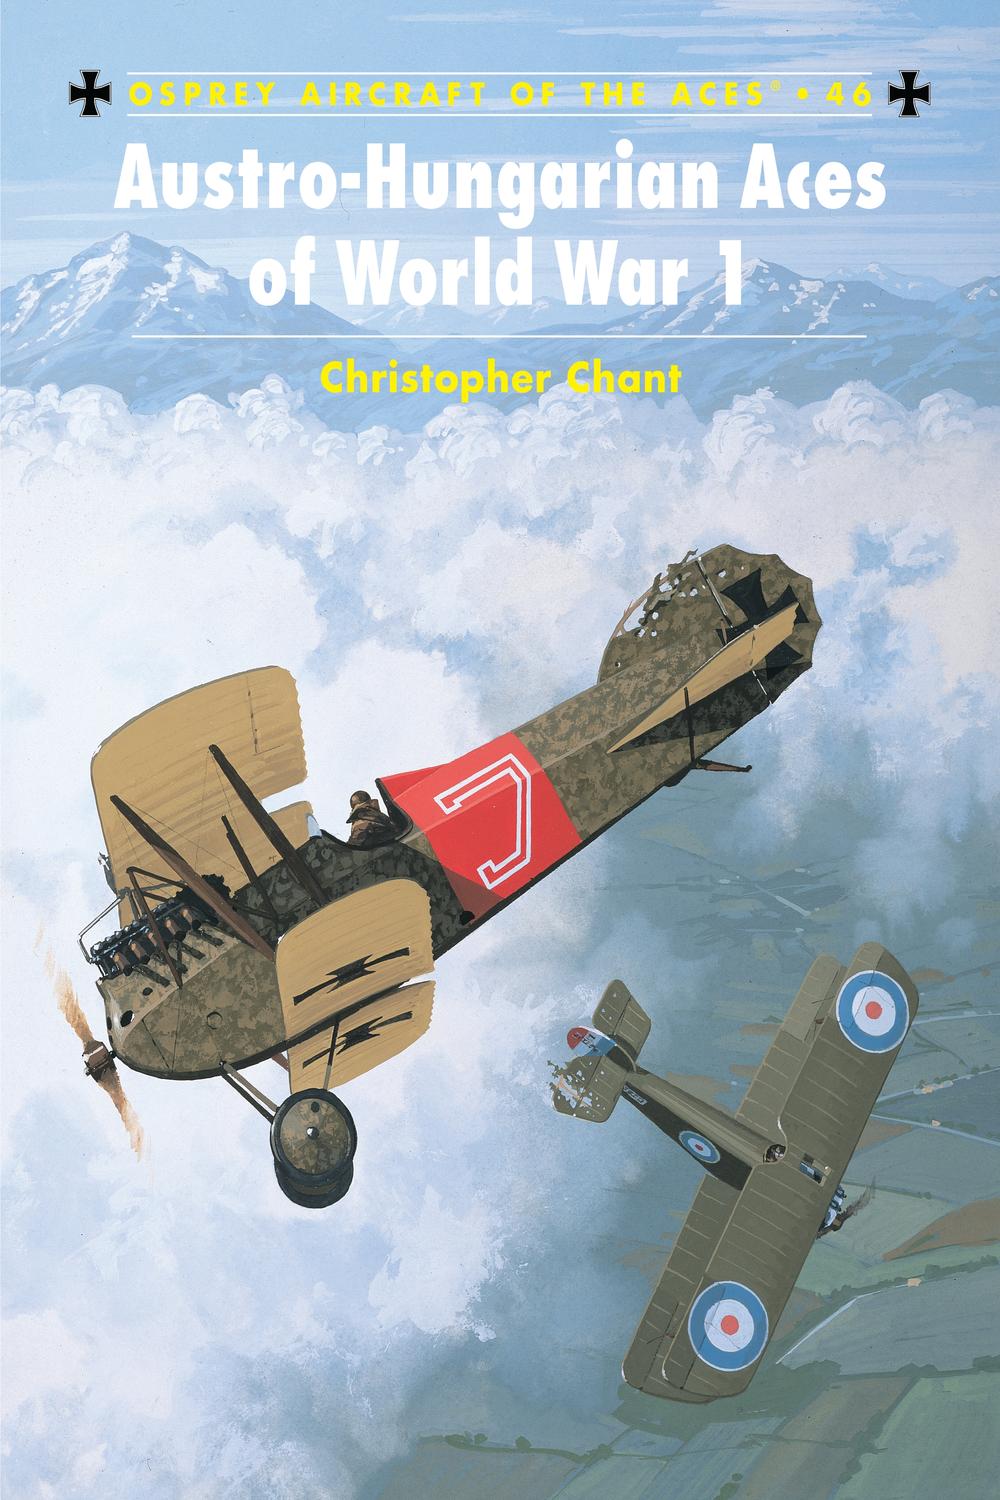 Austro-Hungarian Aces of World War 1 - Chris Chant, Mark Rolfe